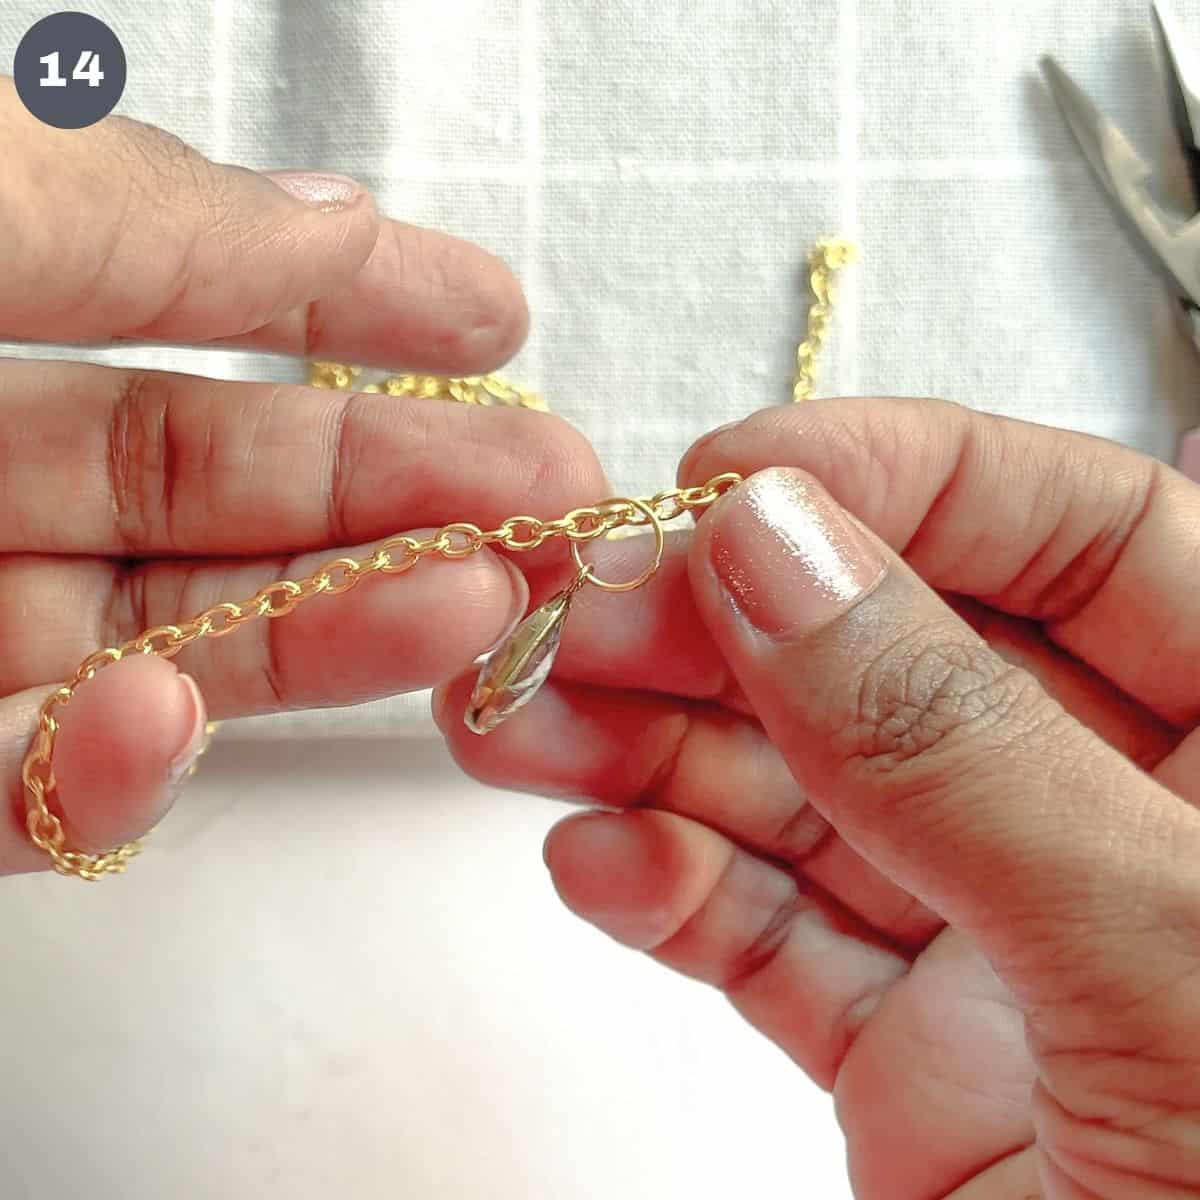 Inserting a pendant into a gold link chain.